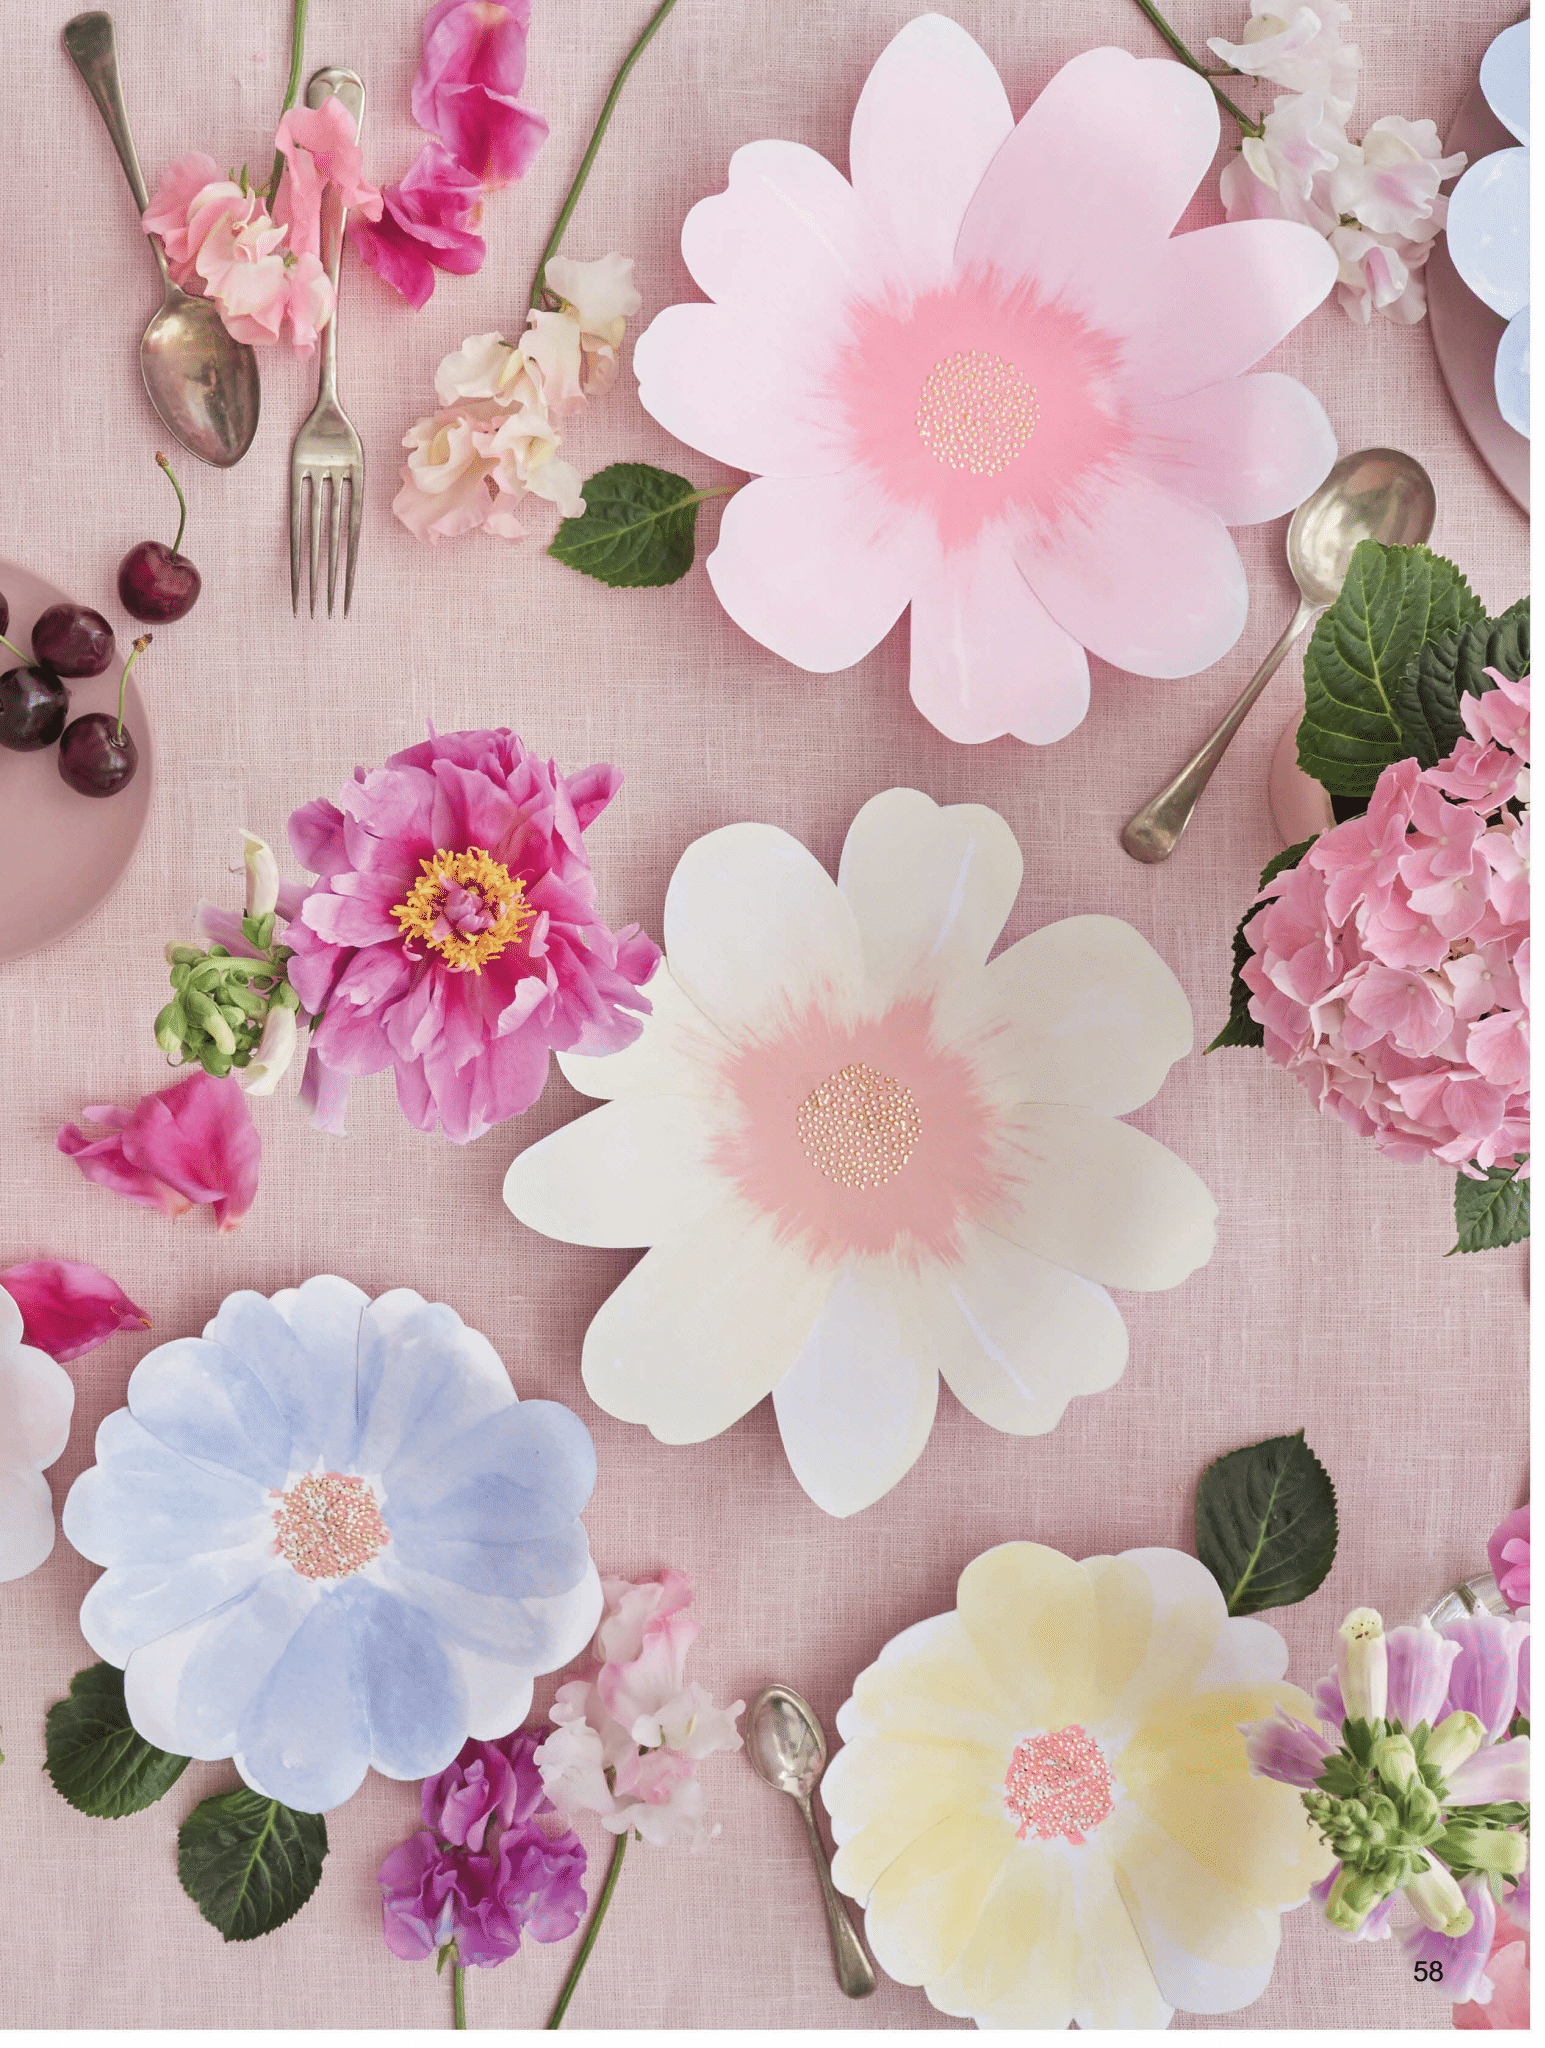 Pink flowers themed tableware 480x480 resolution